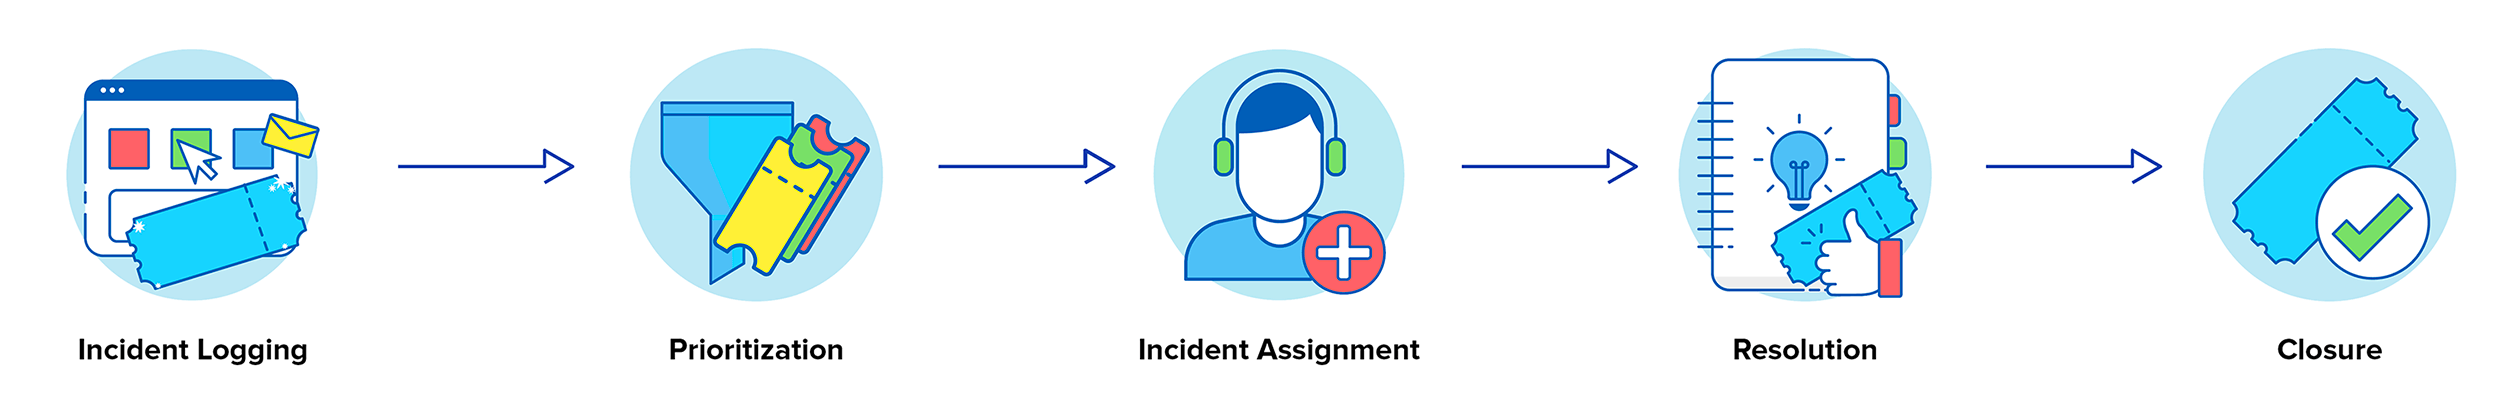 Incident resolution process workflow